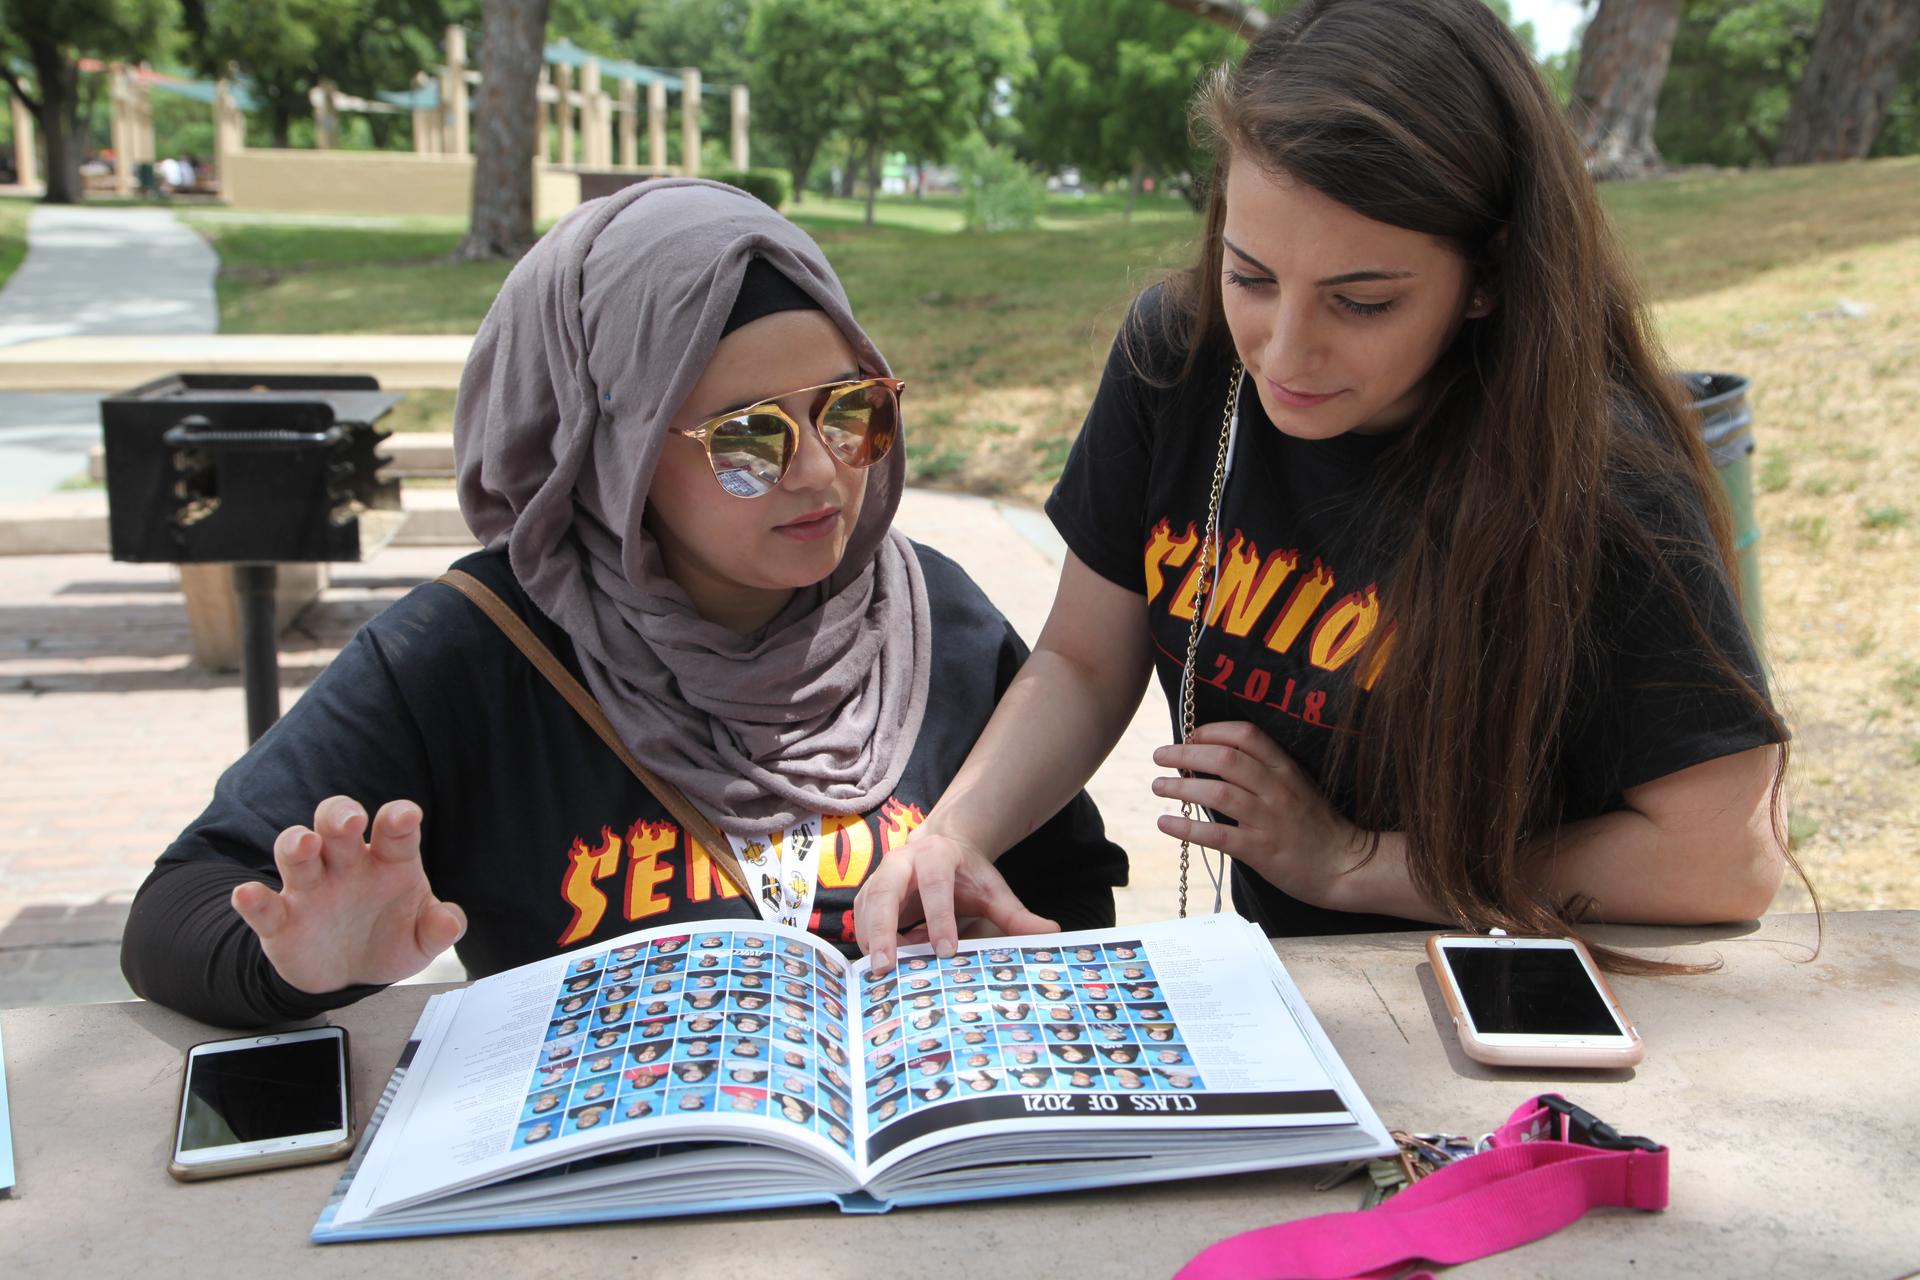 Young woman sits at bench, flipping through year book, while another young woman stands next to her, leaning over to look